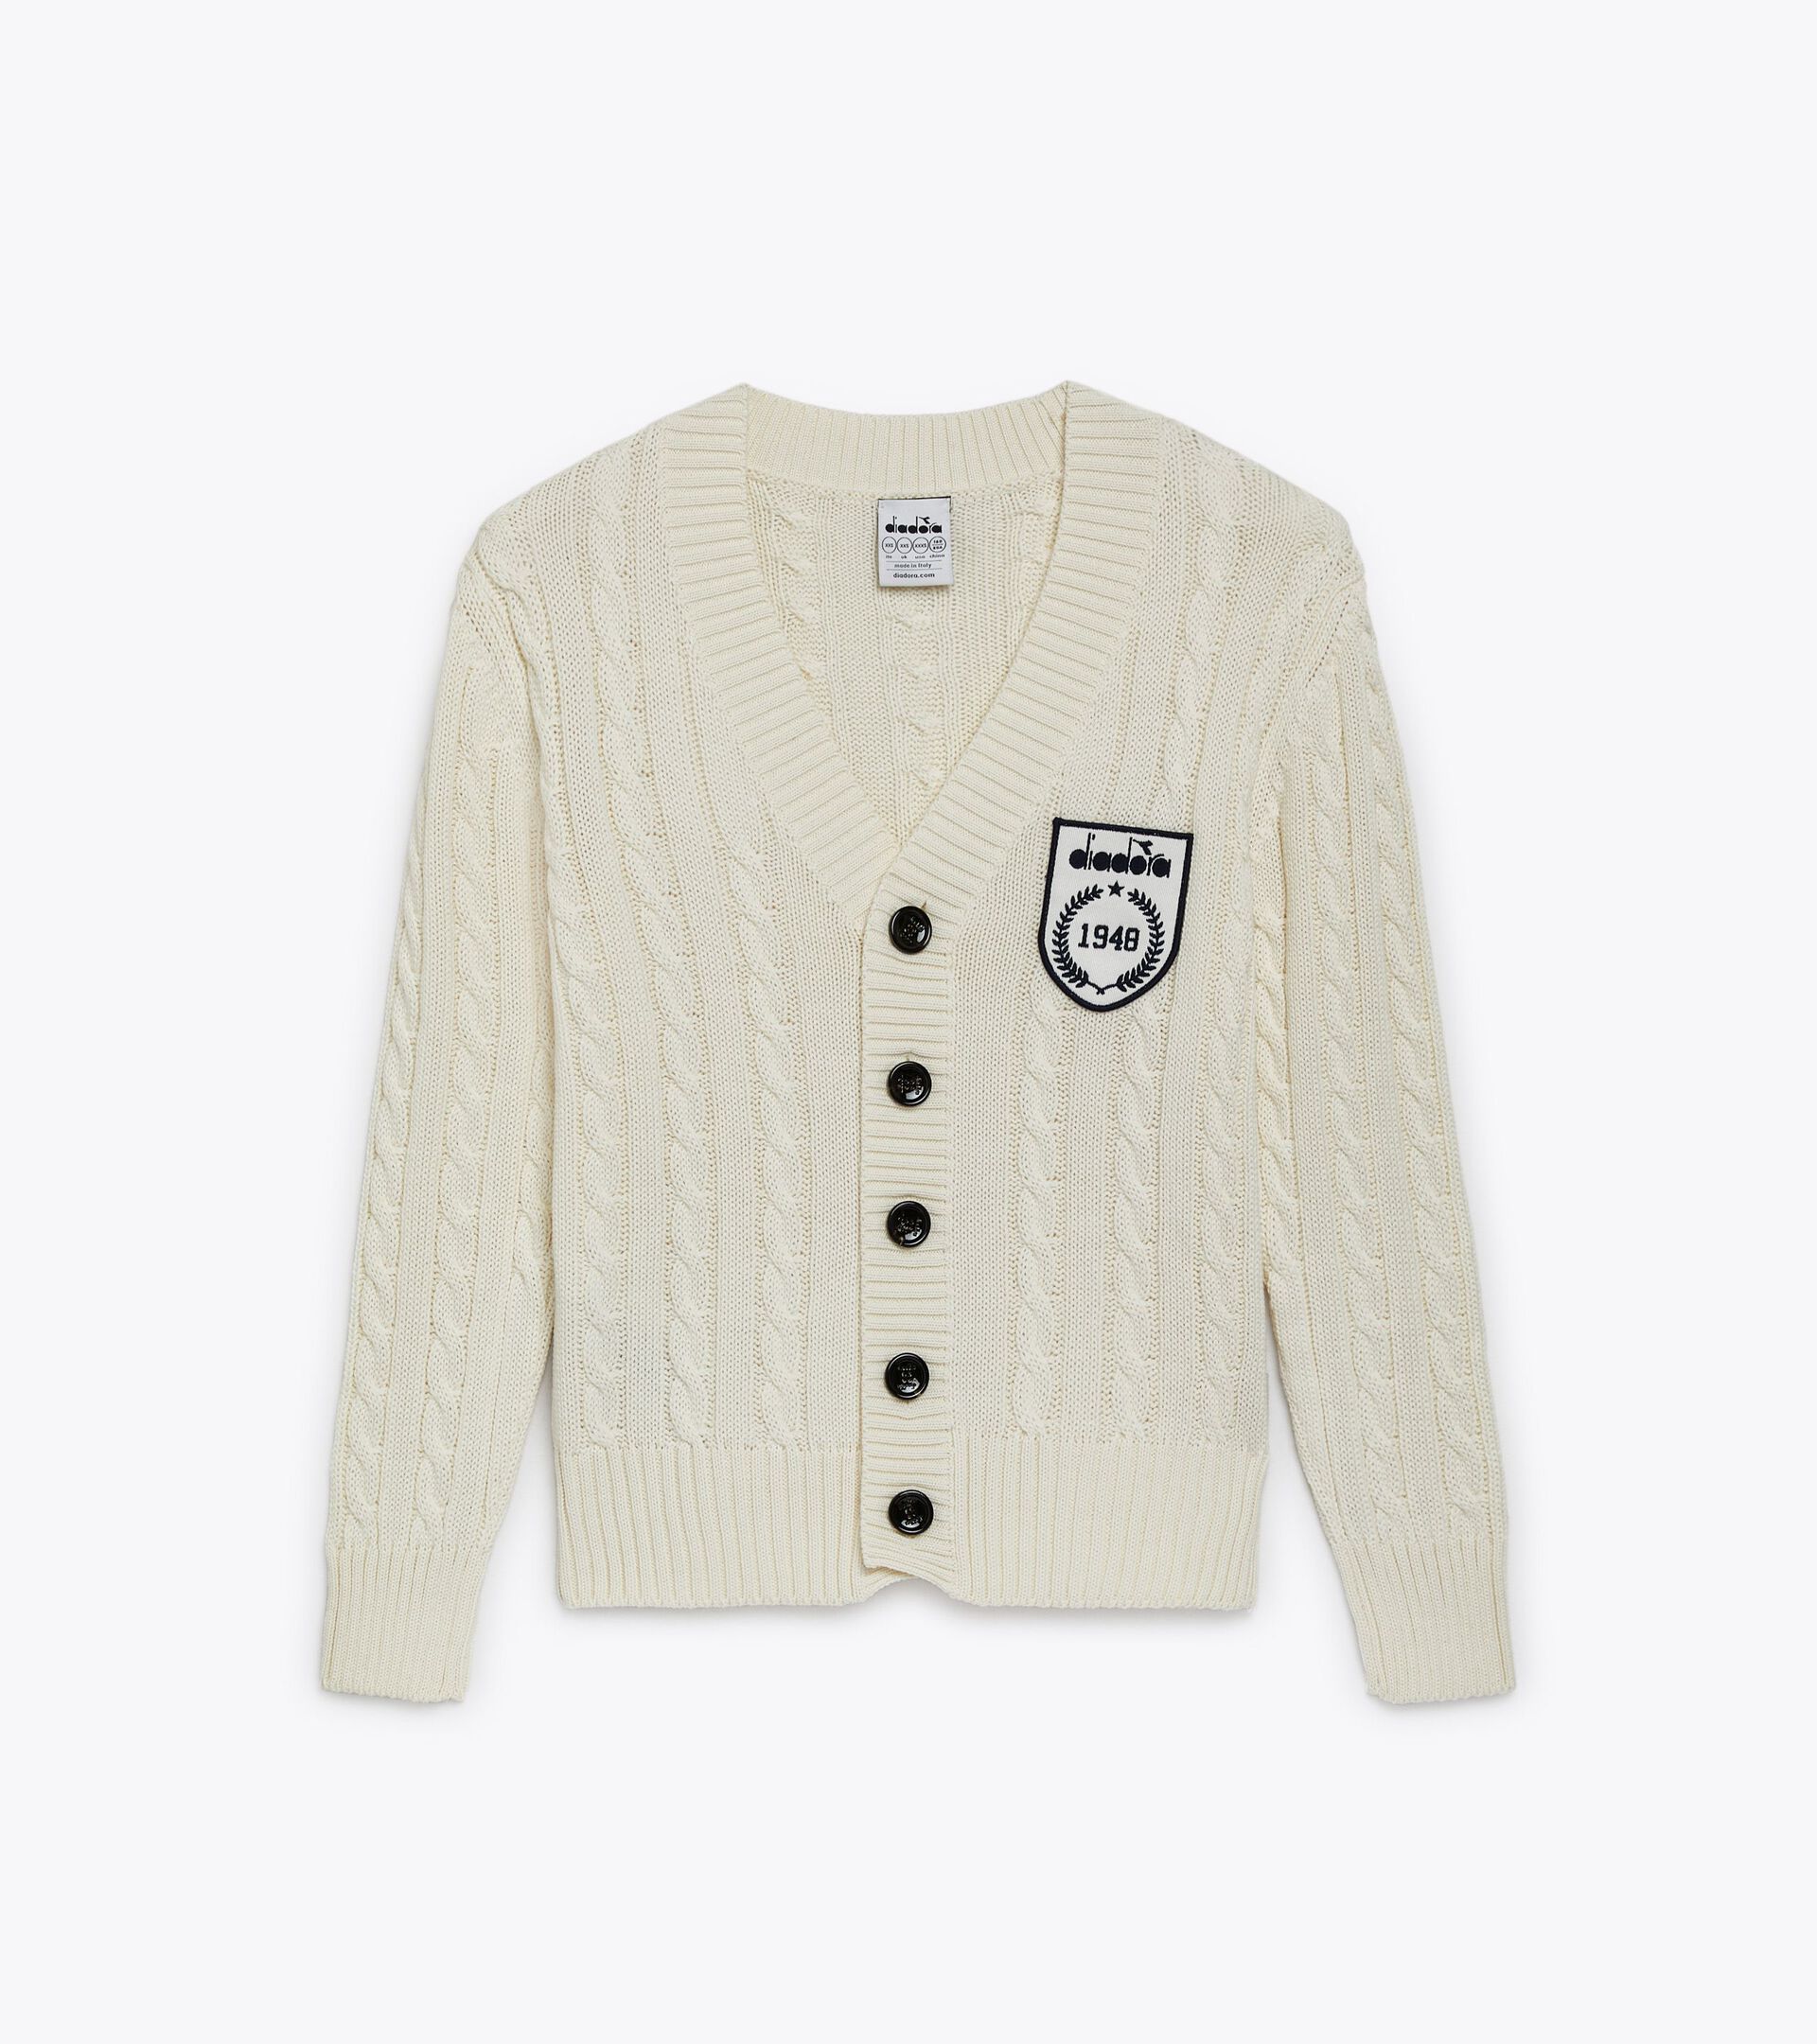 Cardigan – Made in Italy - Gender Neutral CARDIGAN LEGACY VANILLE EIS WEISS - Diadora